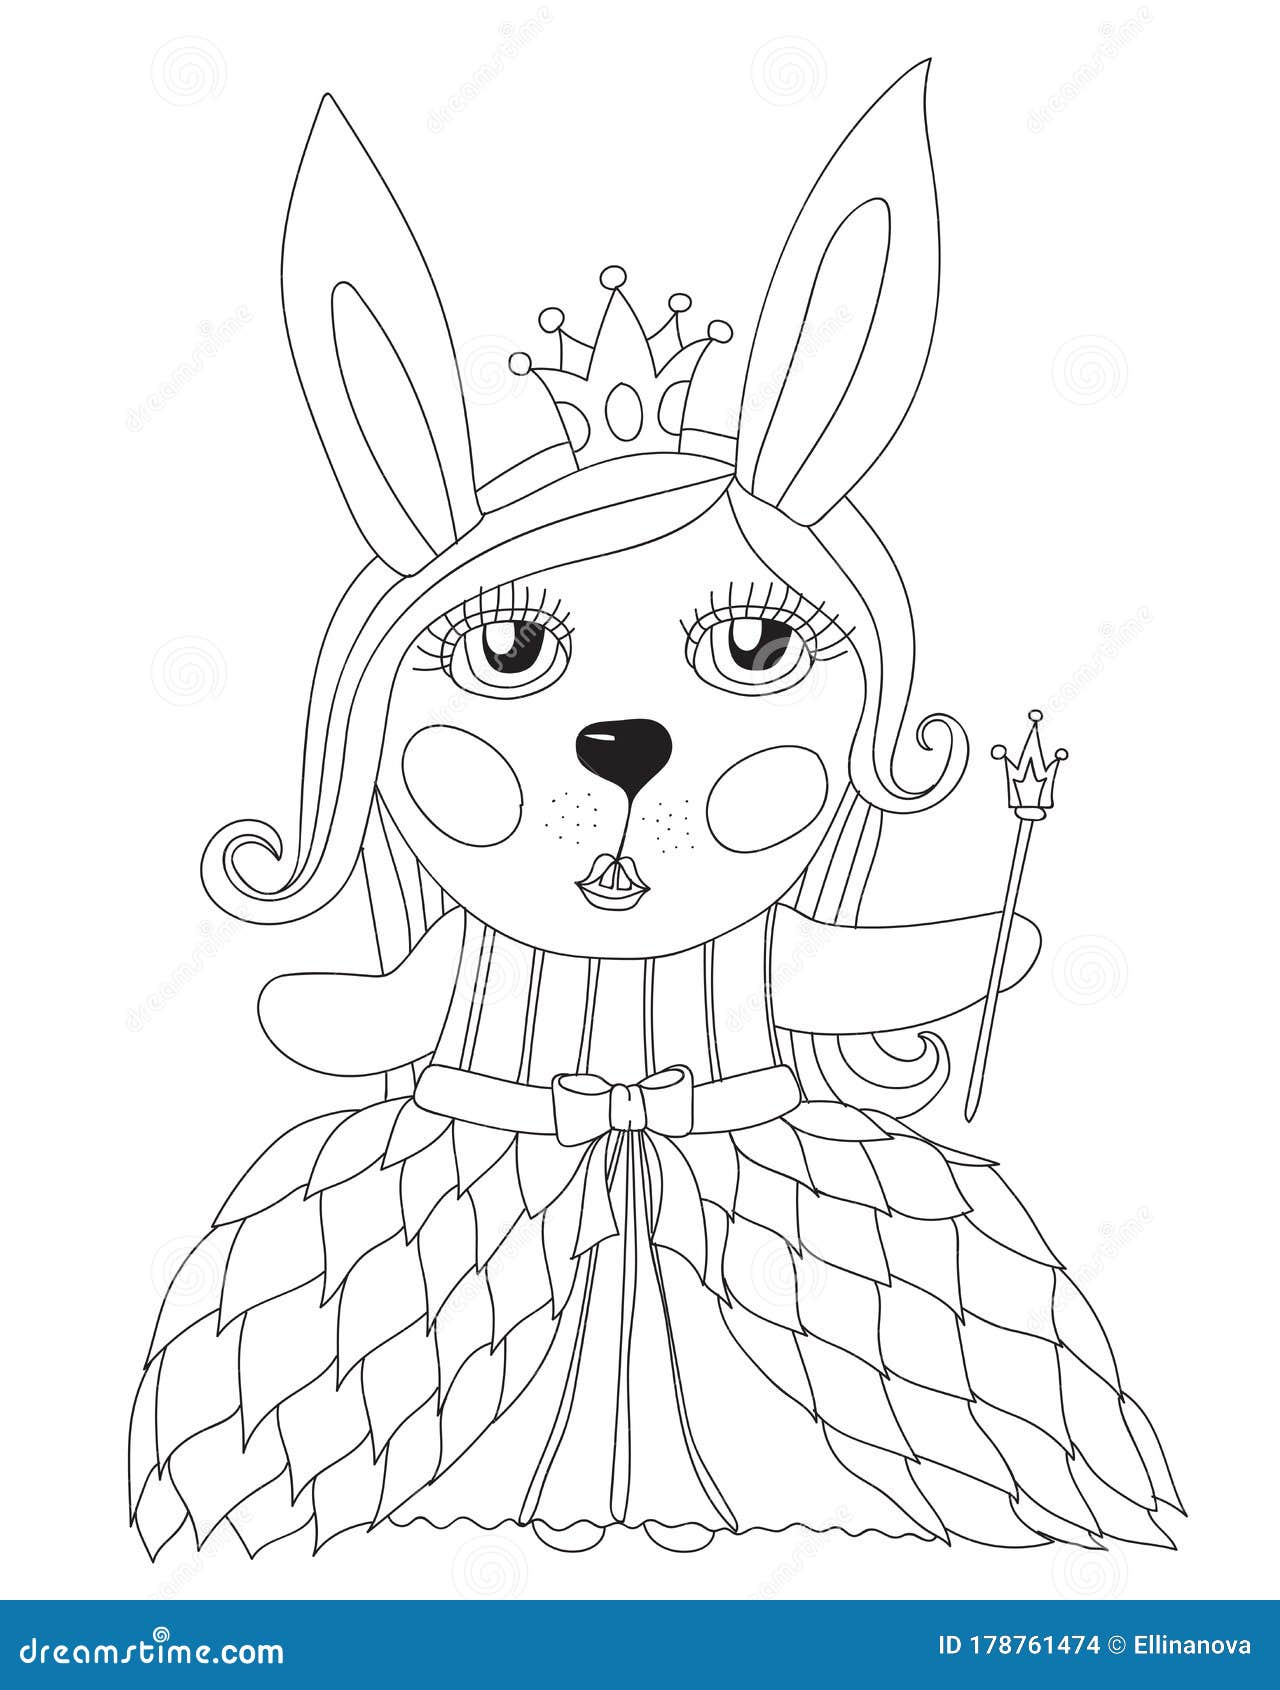 Cute Rabbit Coloring Page Isolated Stock Vector - Illustration of child ...